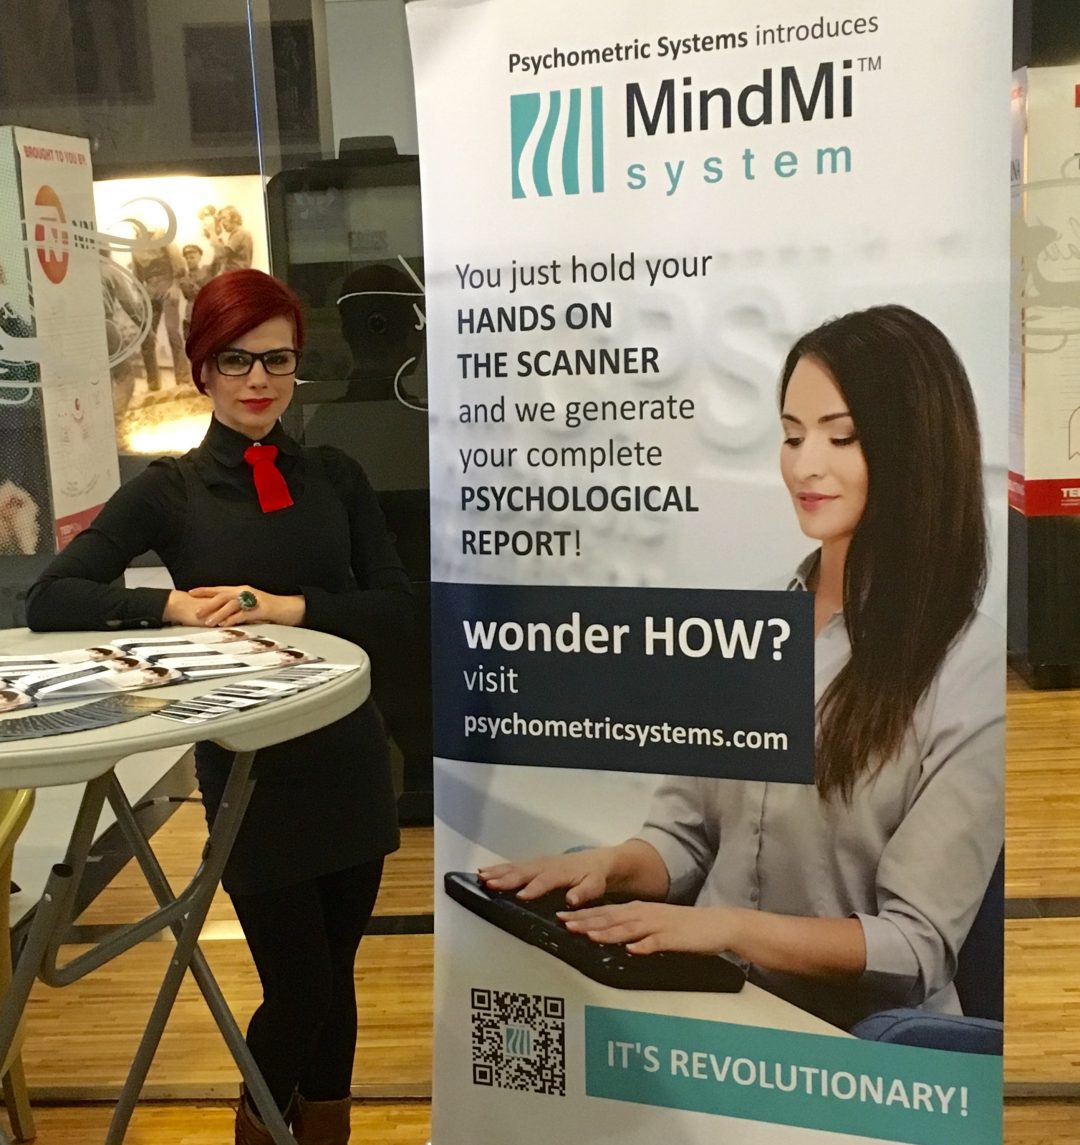 The MindMi™ System was presented at the TEDx Cluj-Napoca event